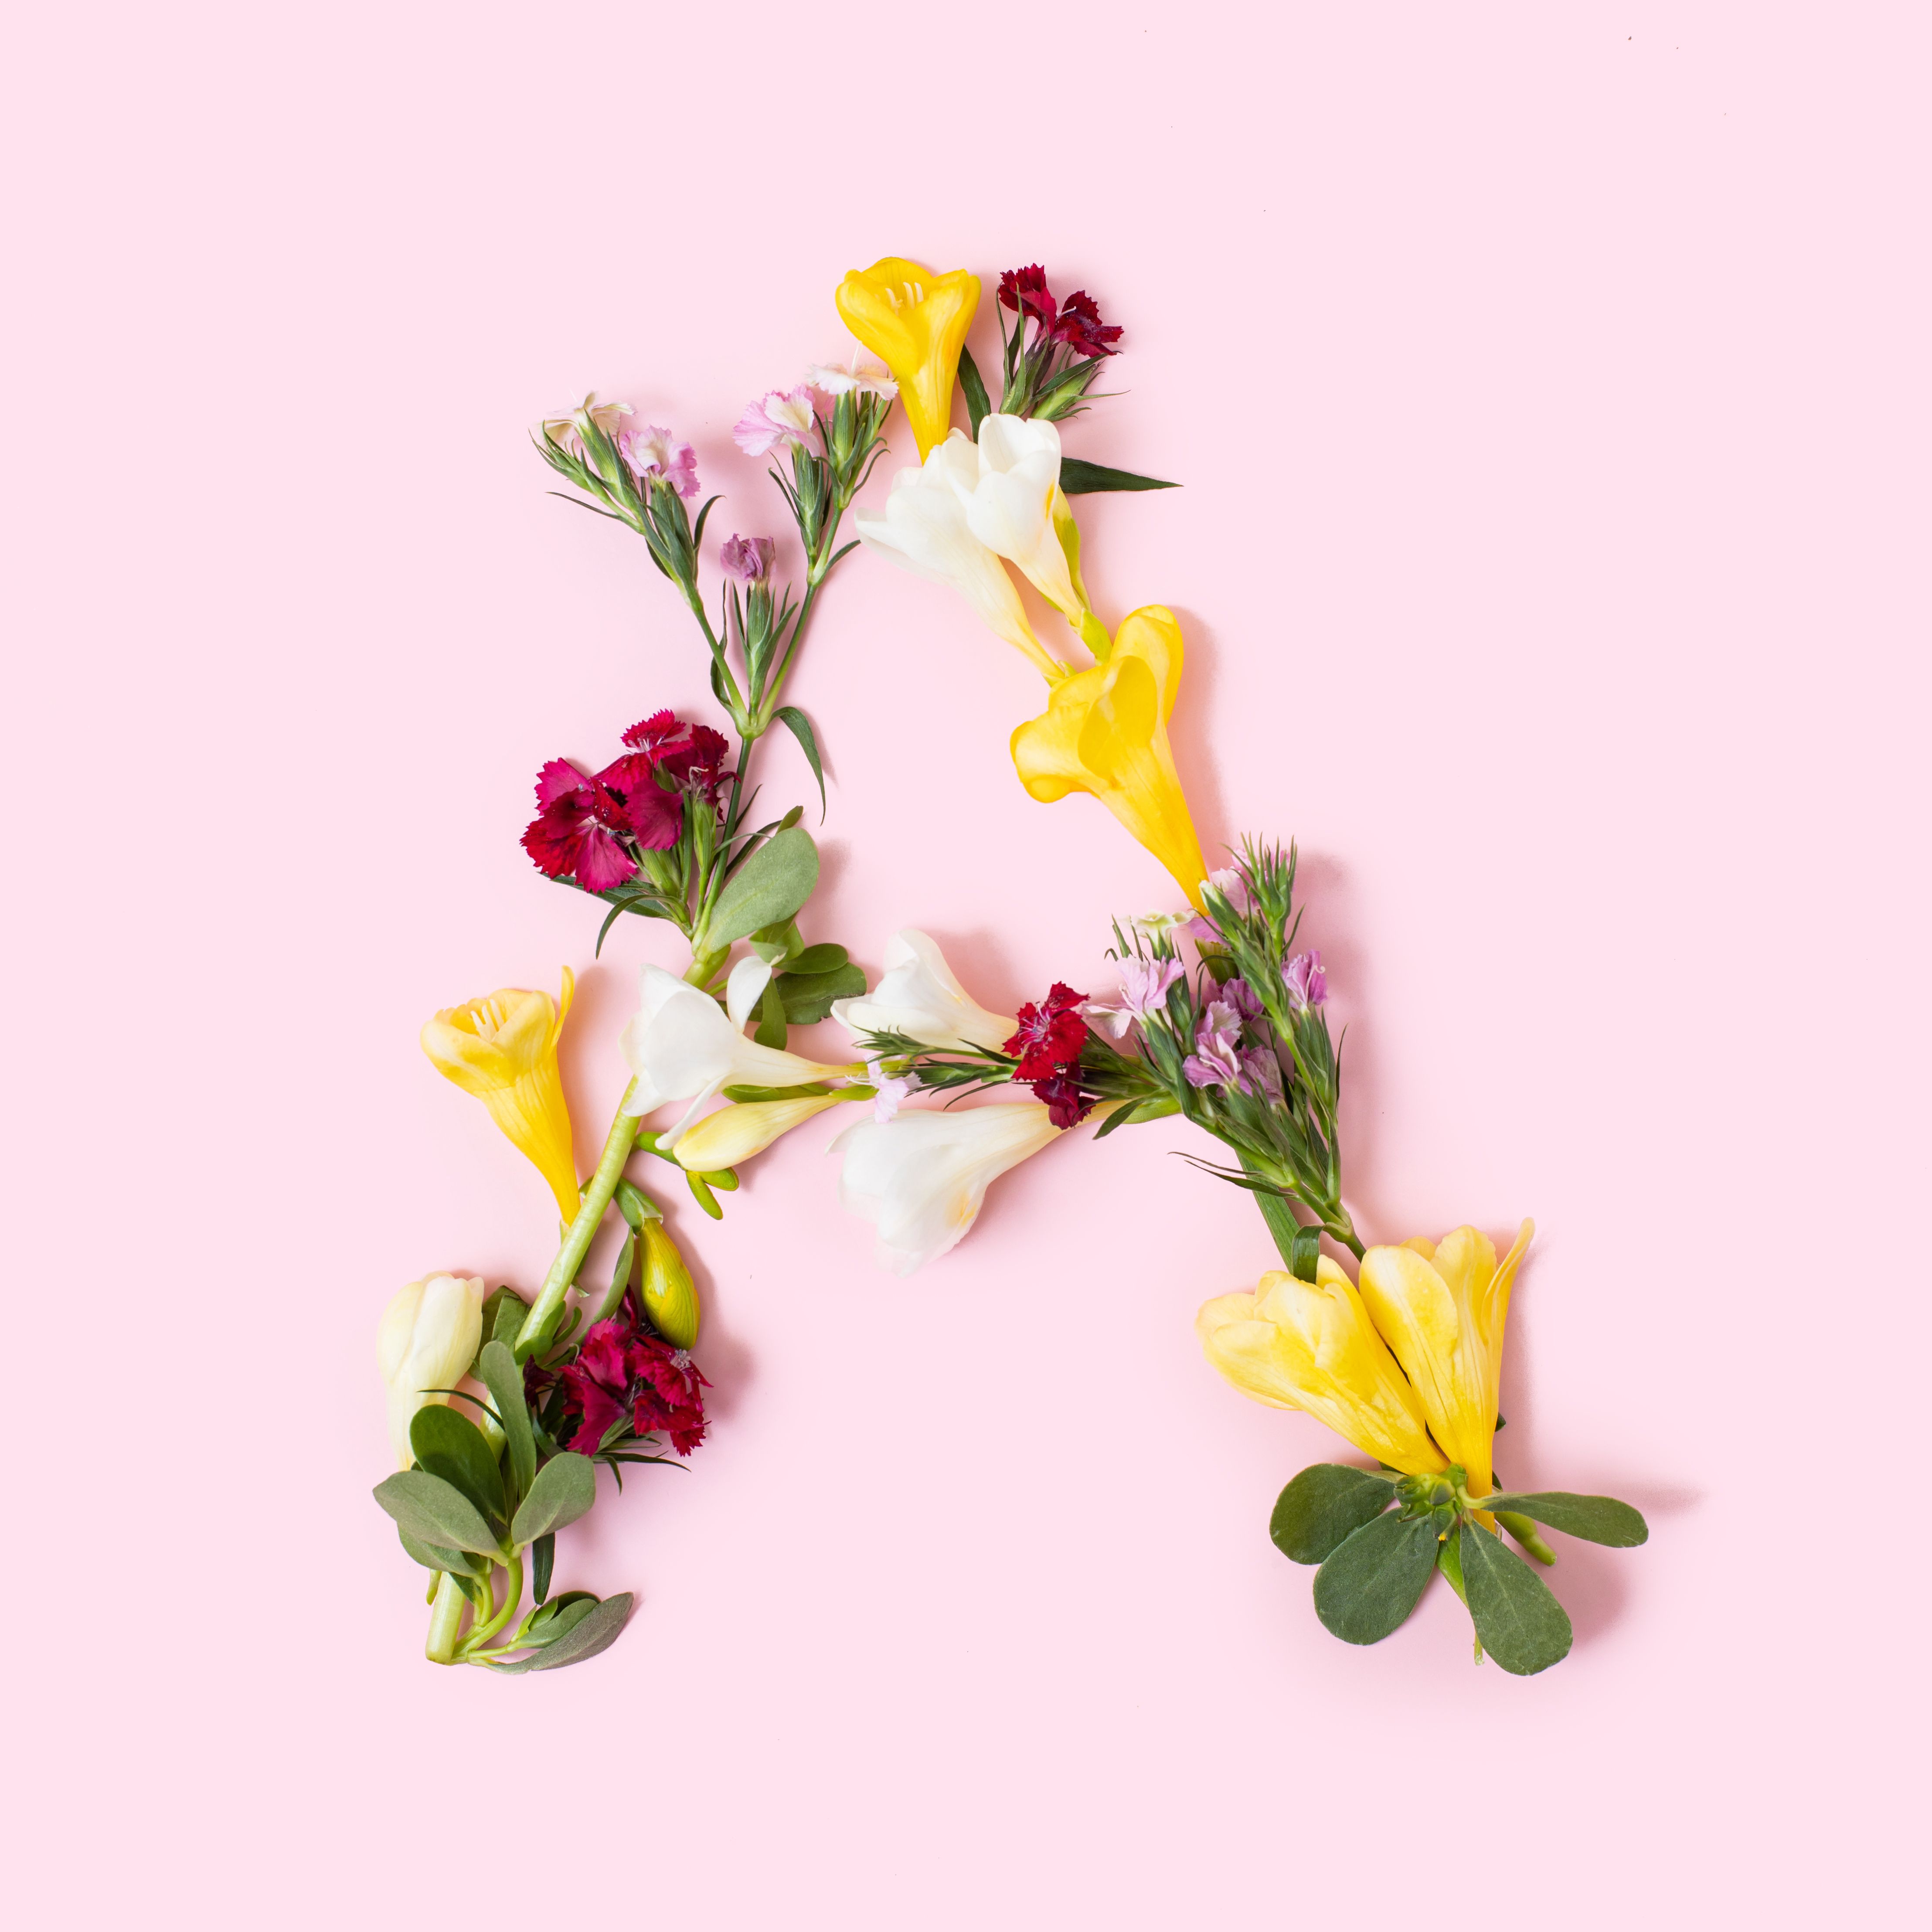 letter a made of natural flowers, petals and leaves floral font concept collection of letters and numbers spring, summer and holidays creative idea